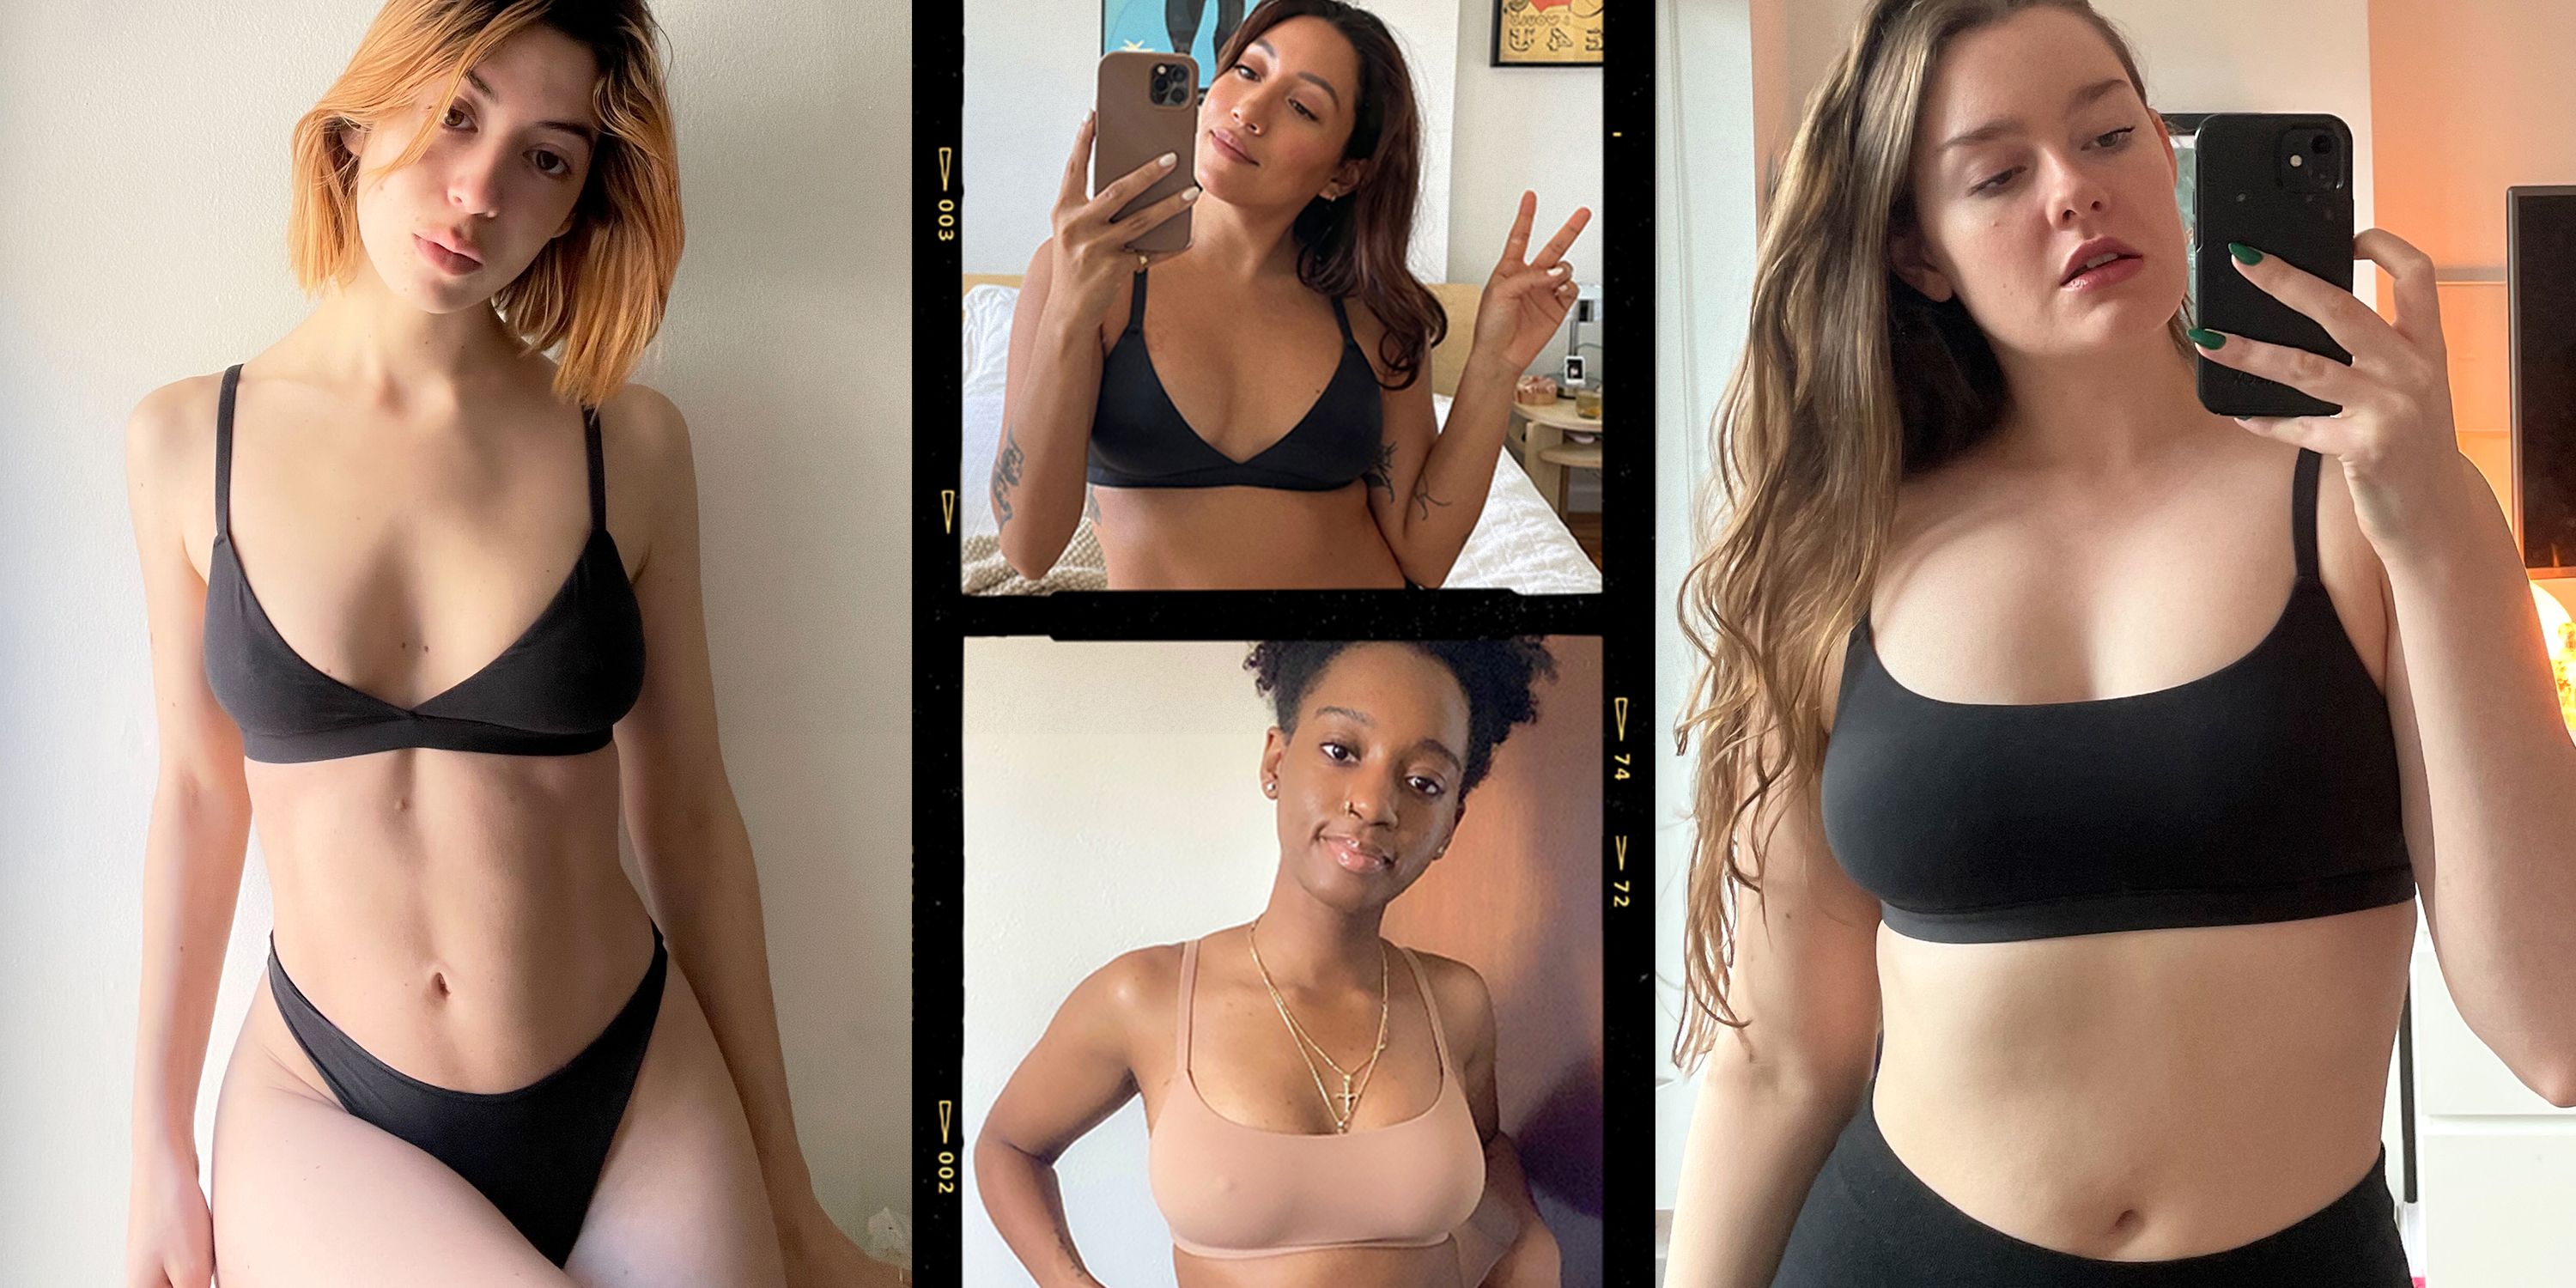 Influencers test Skims bras with completely opposite reviews